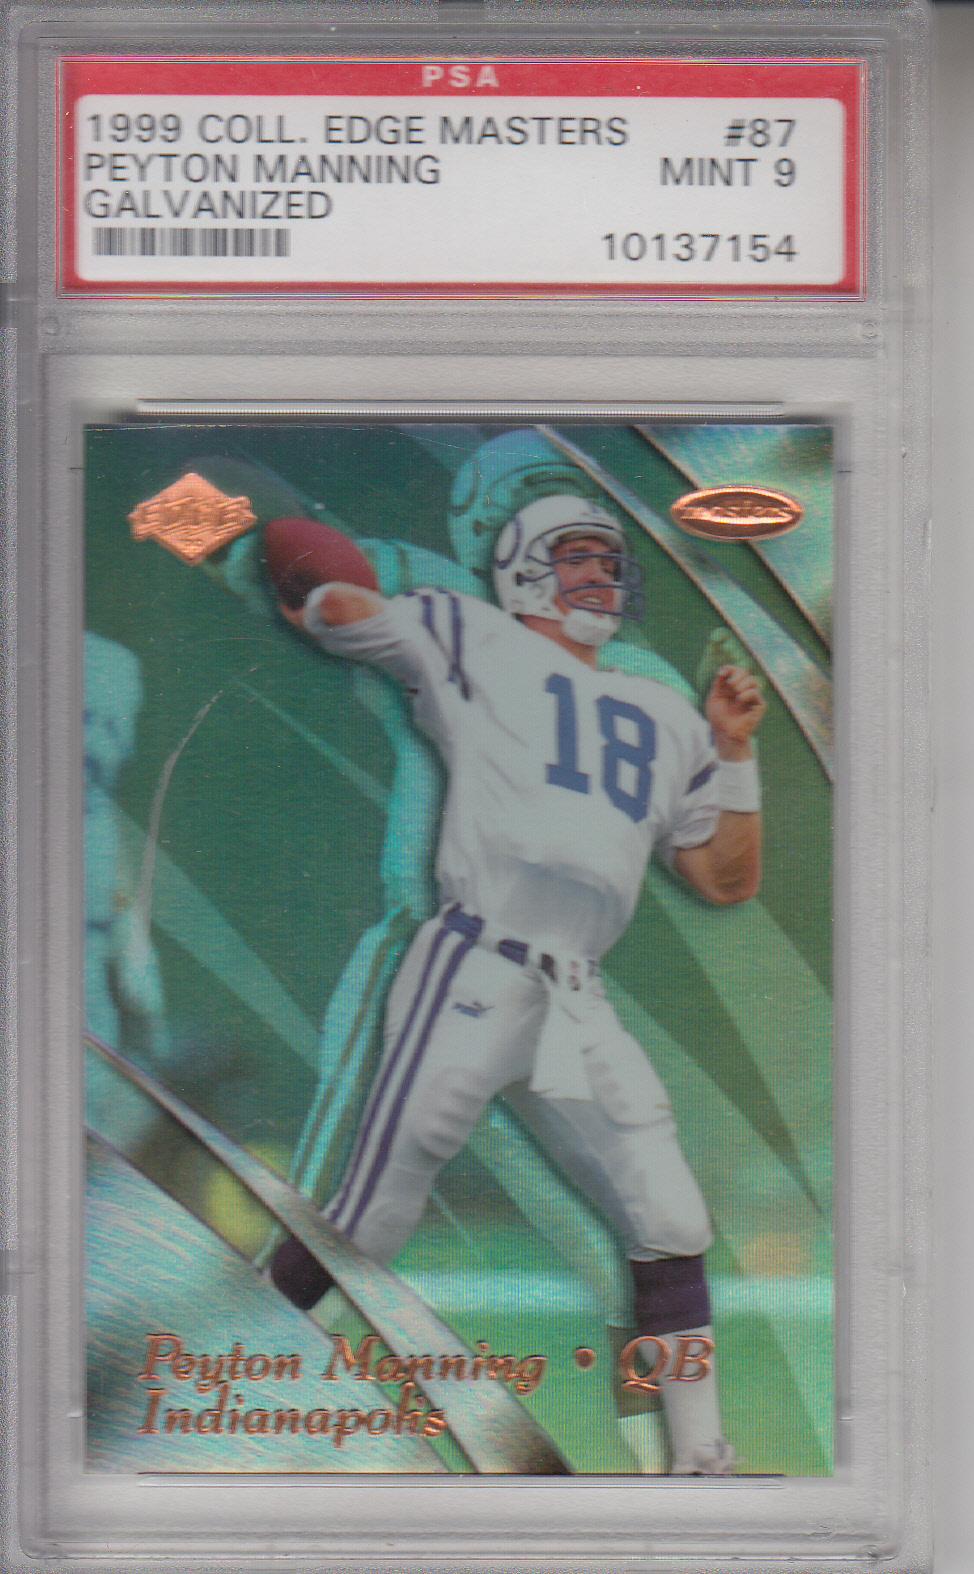 1999 Collector's Edge Masters Galvanized #87 Peyton Manning COLTS PSA 9 MT Z21951